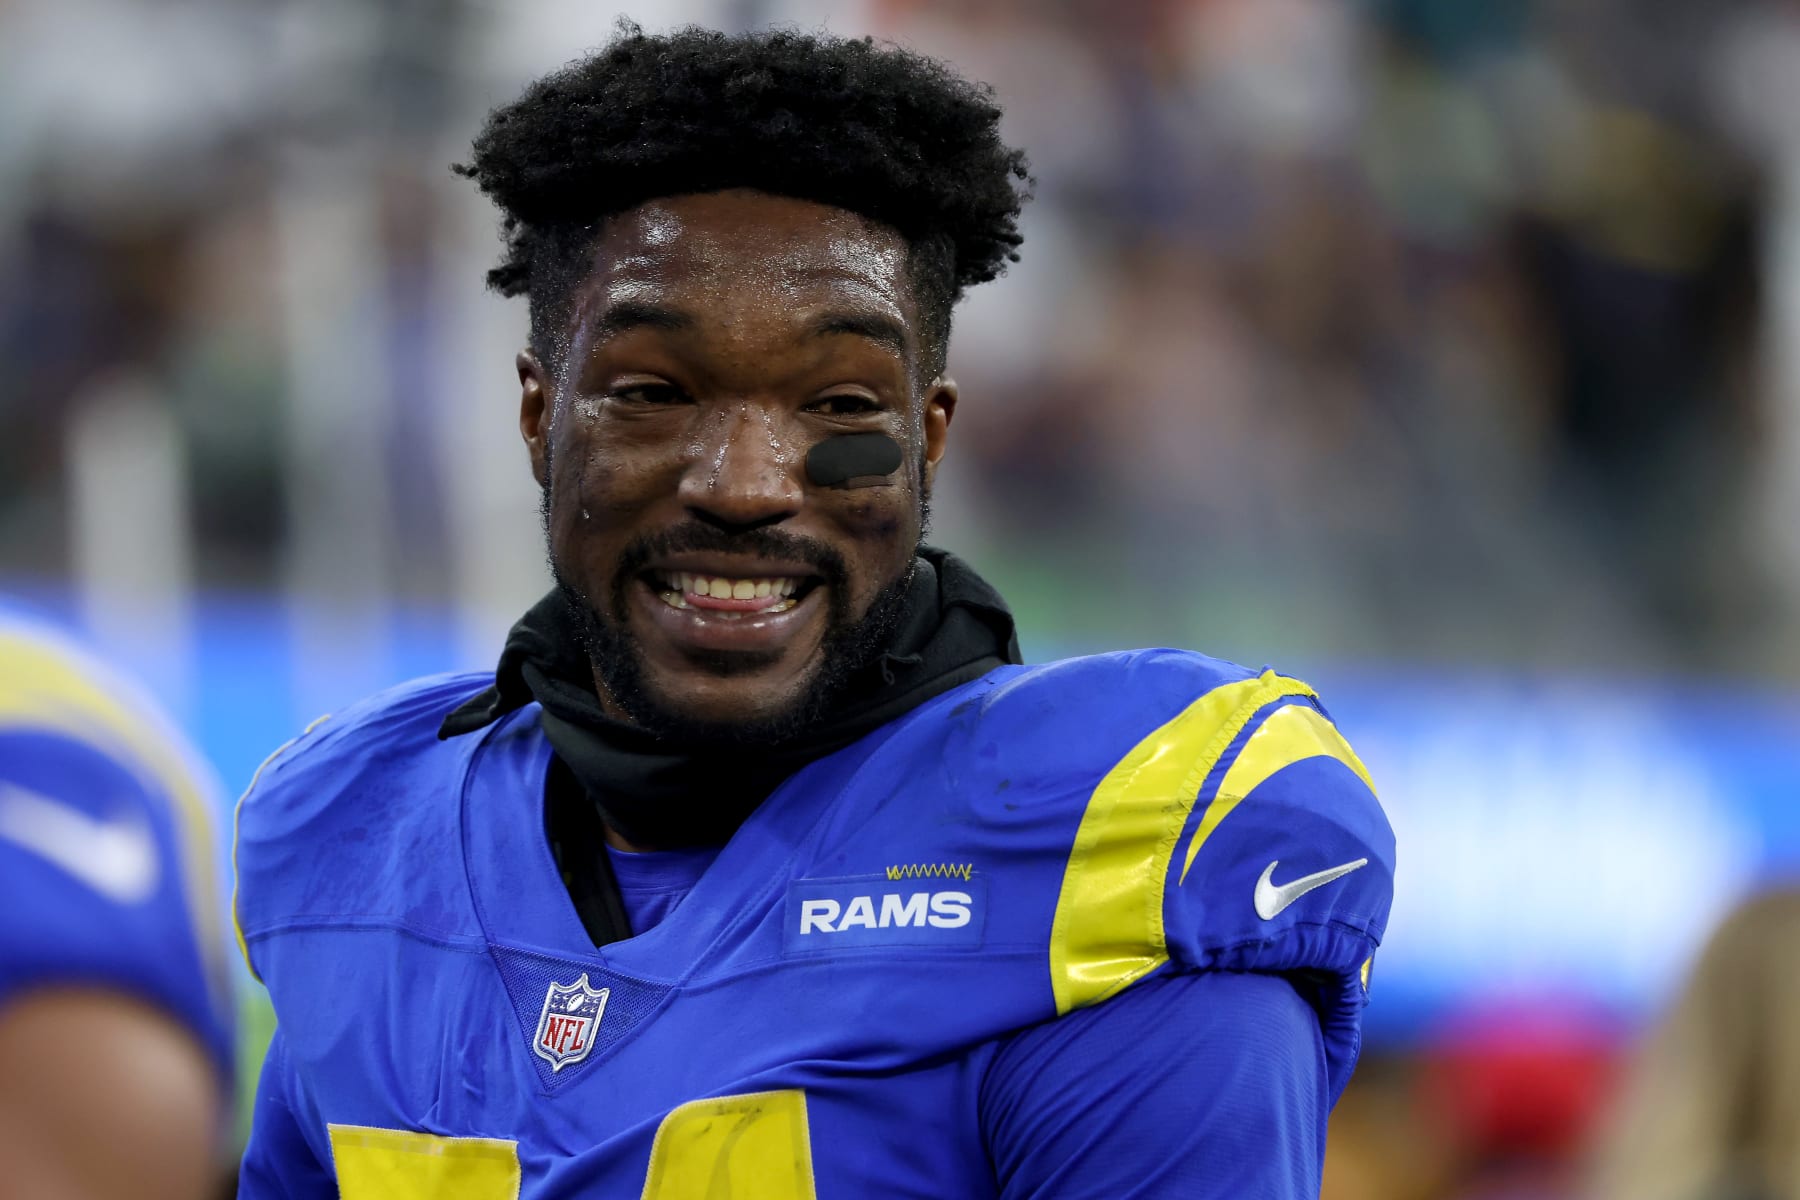 Rams 2023 free agency preview: Market will dictate whether Baker Mayfield  returns